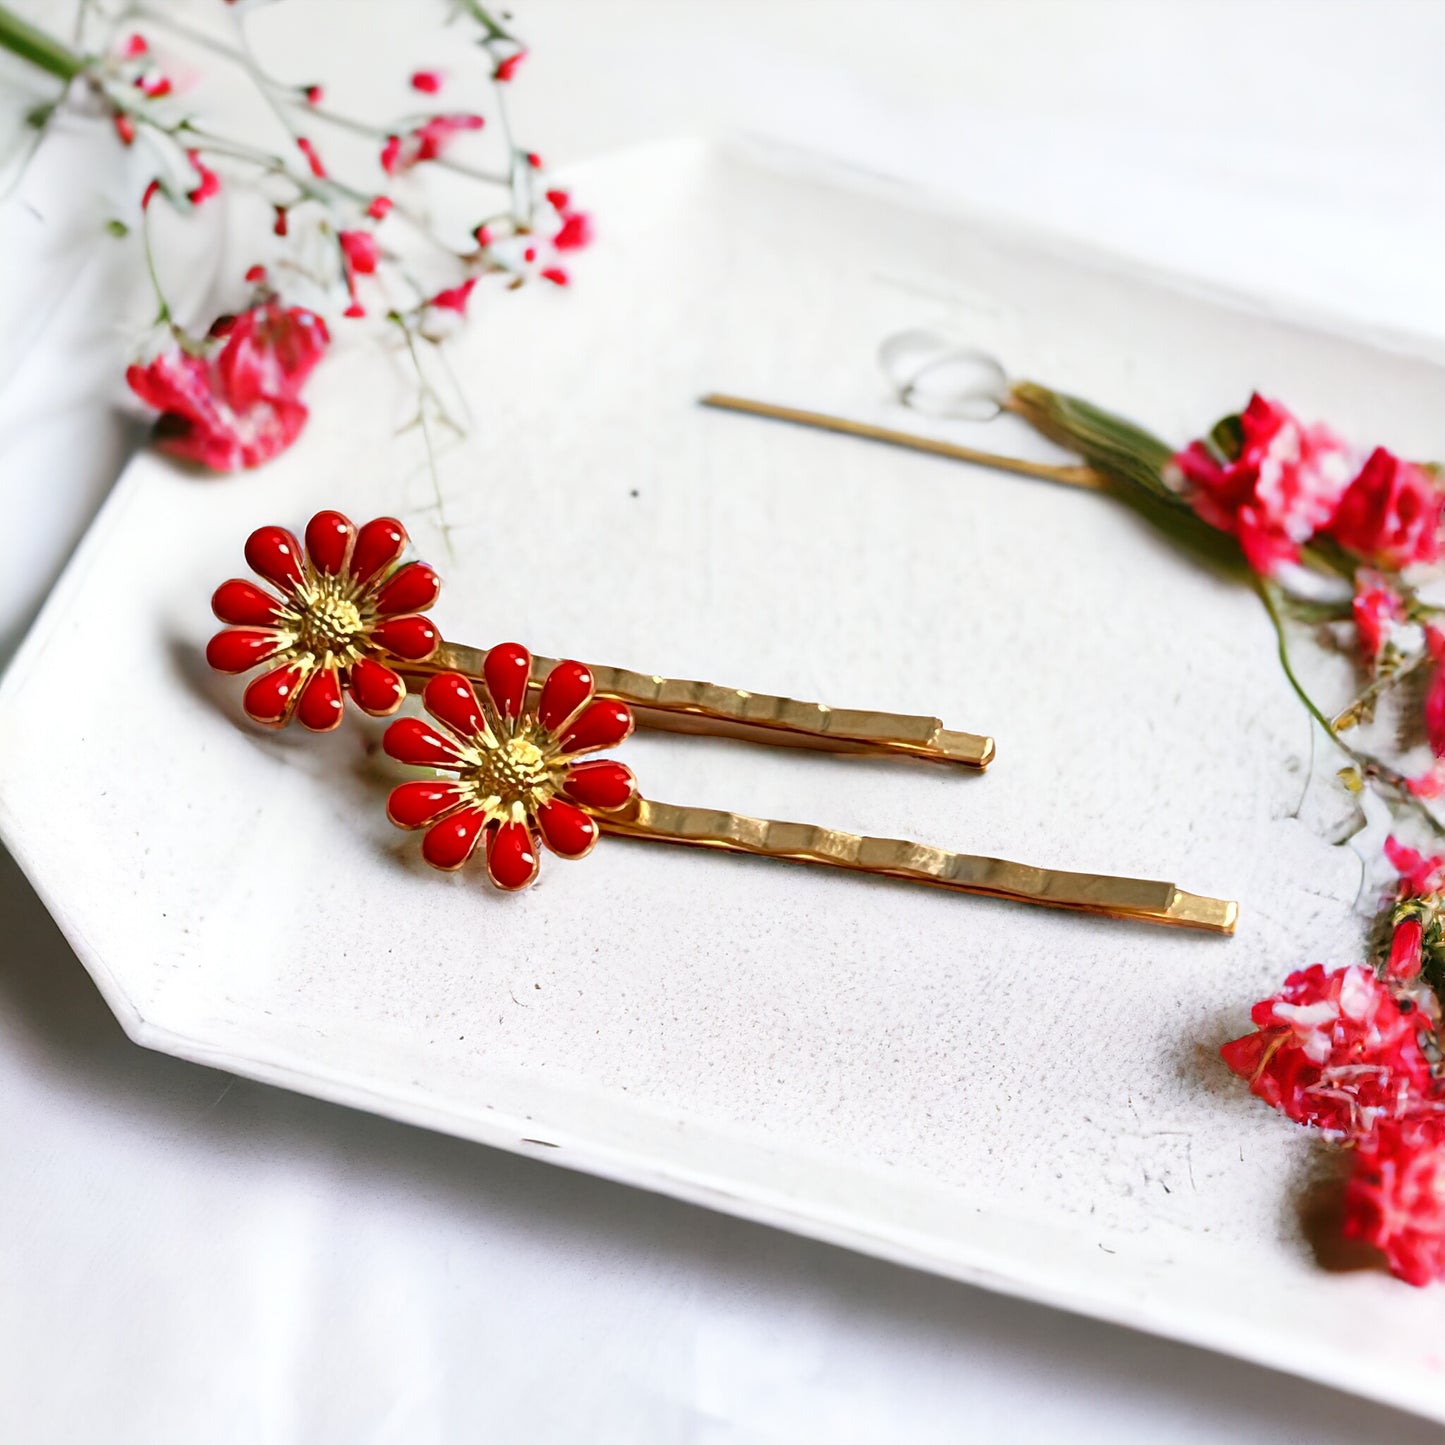 Decorative Red Enamel Wildflower Hair Pins - Delicate Floral Accessories